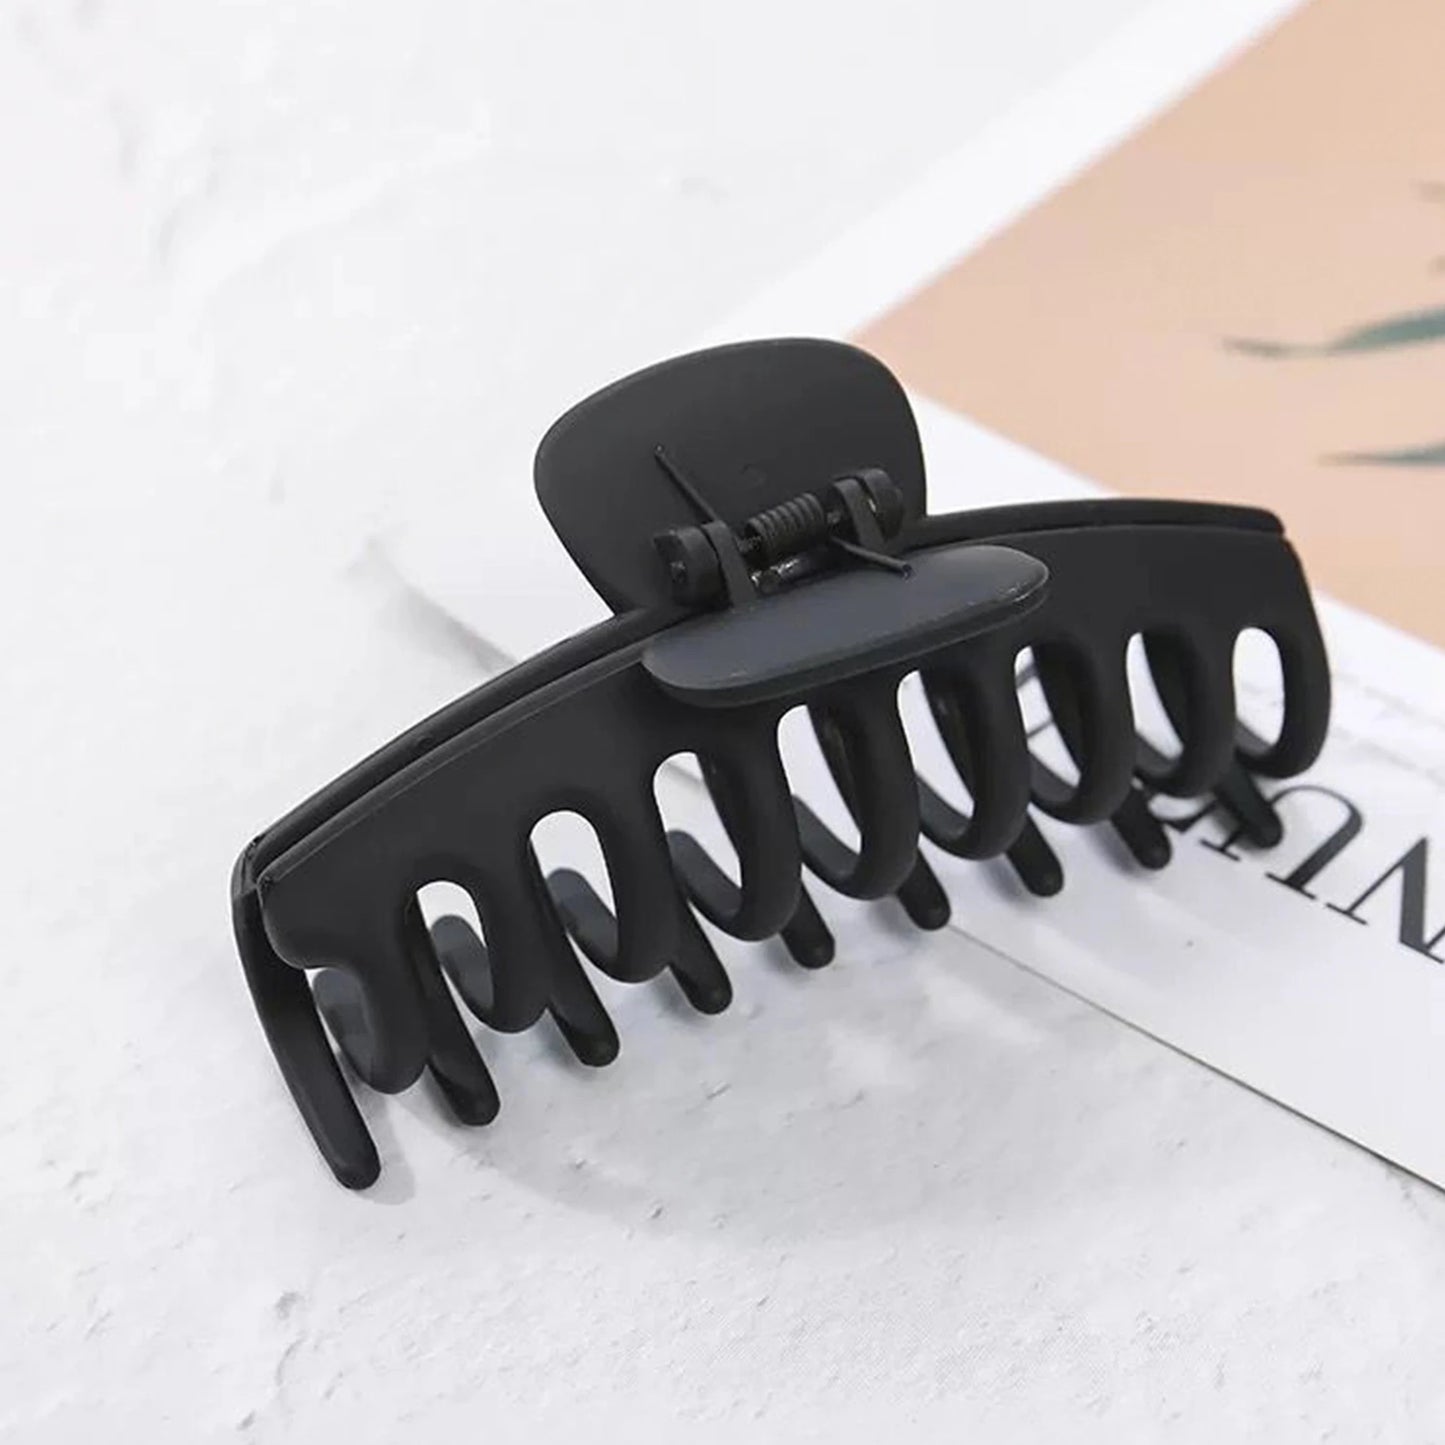 Stop looking for the perfect hair clip! Our large hair grips will hold up your hair while adding a little fashion flare to your wardrobe.